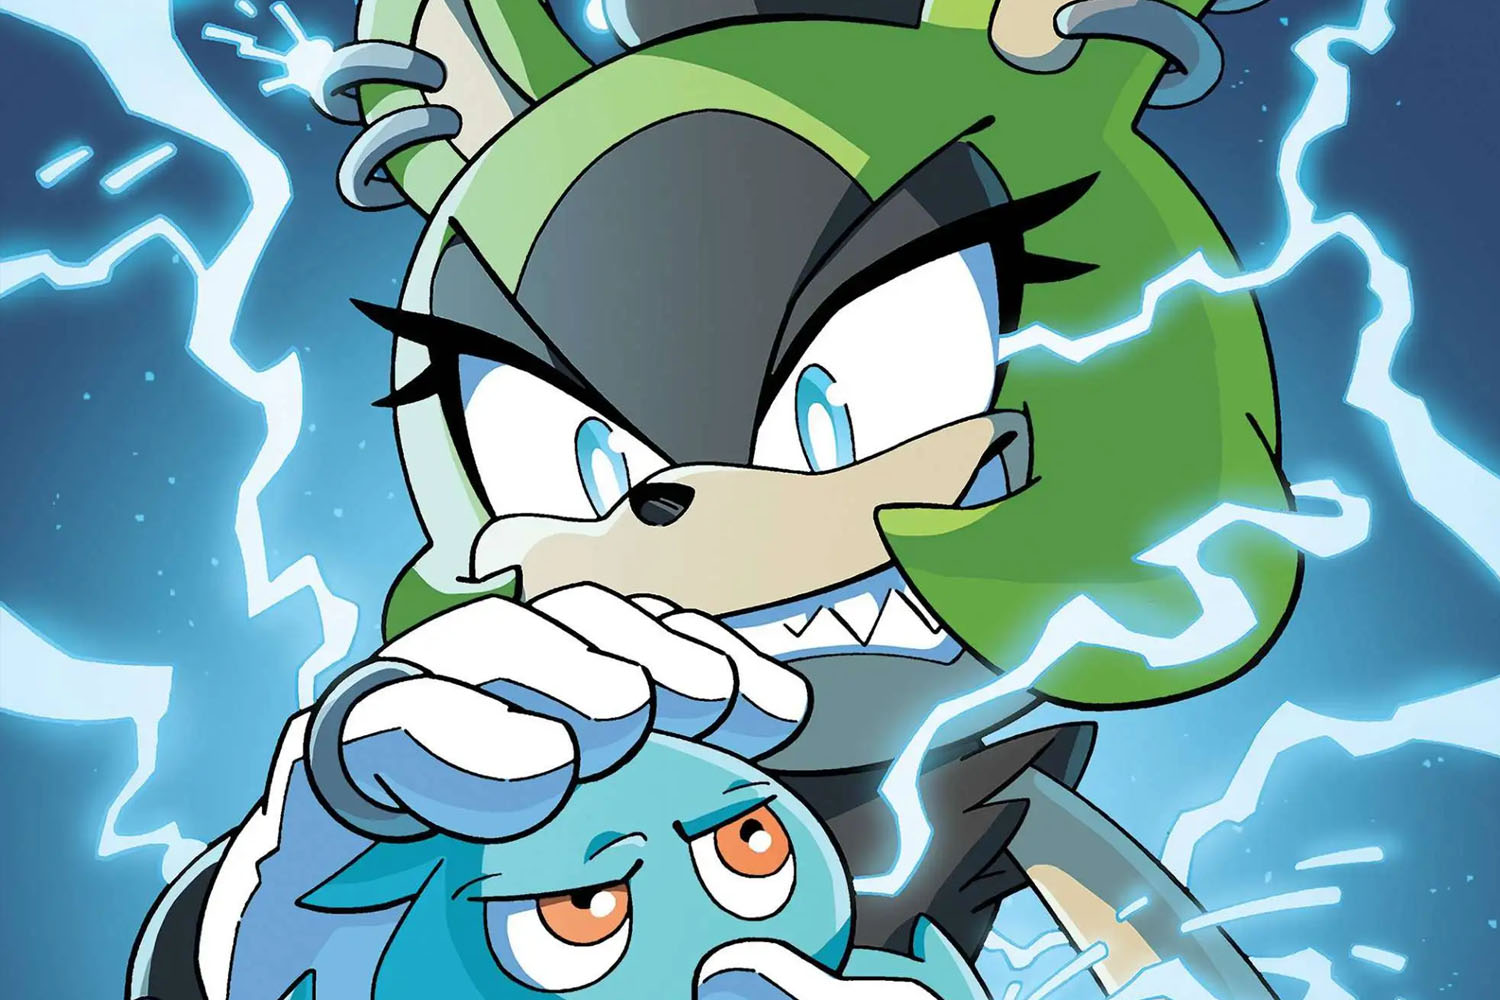 'Sonic the Hedgehog' #54 review